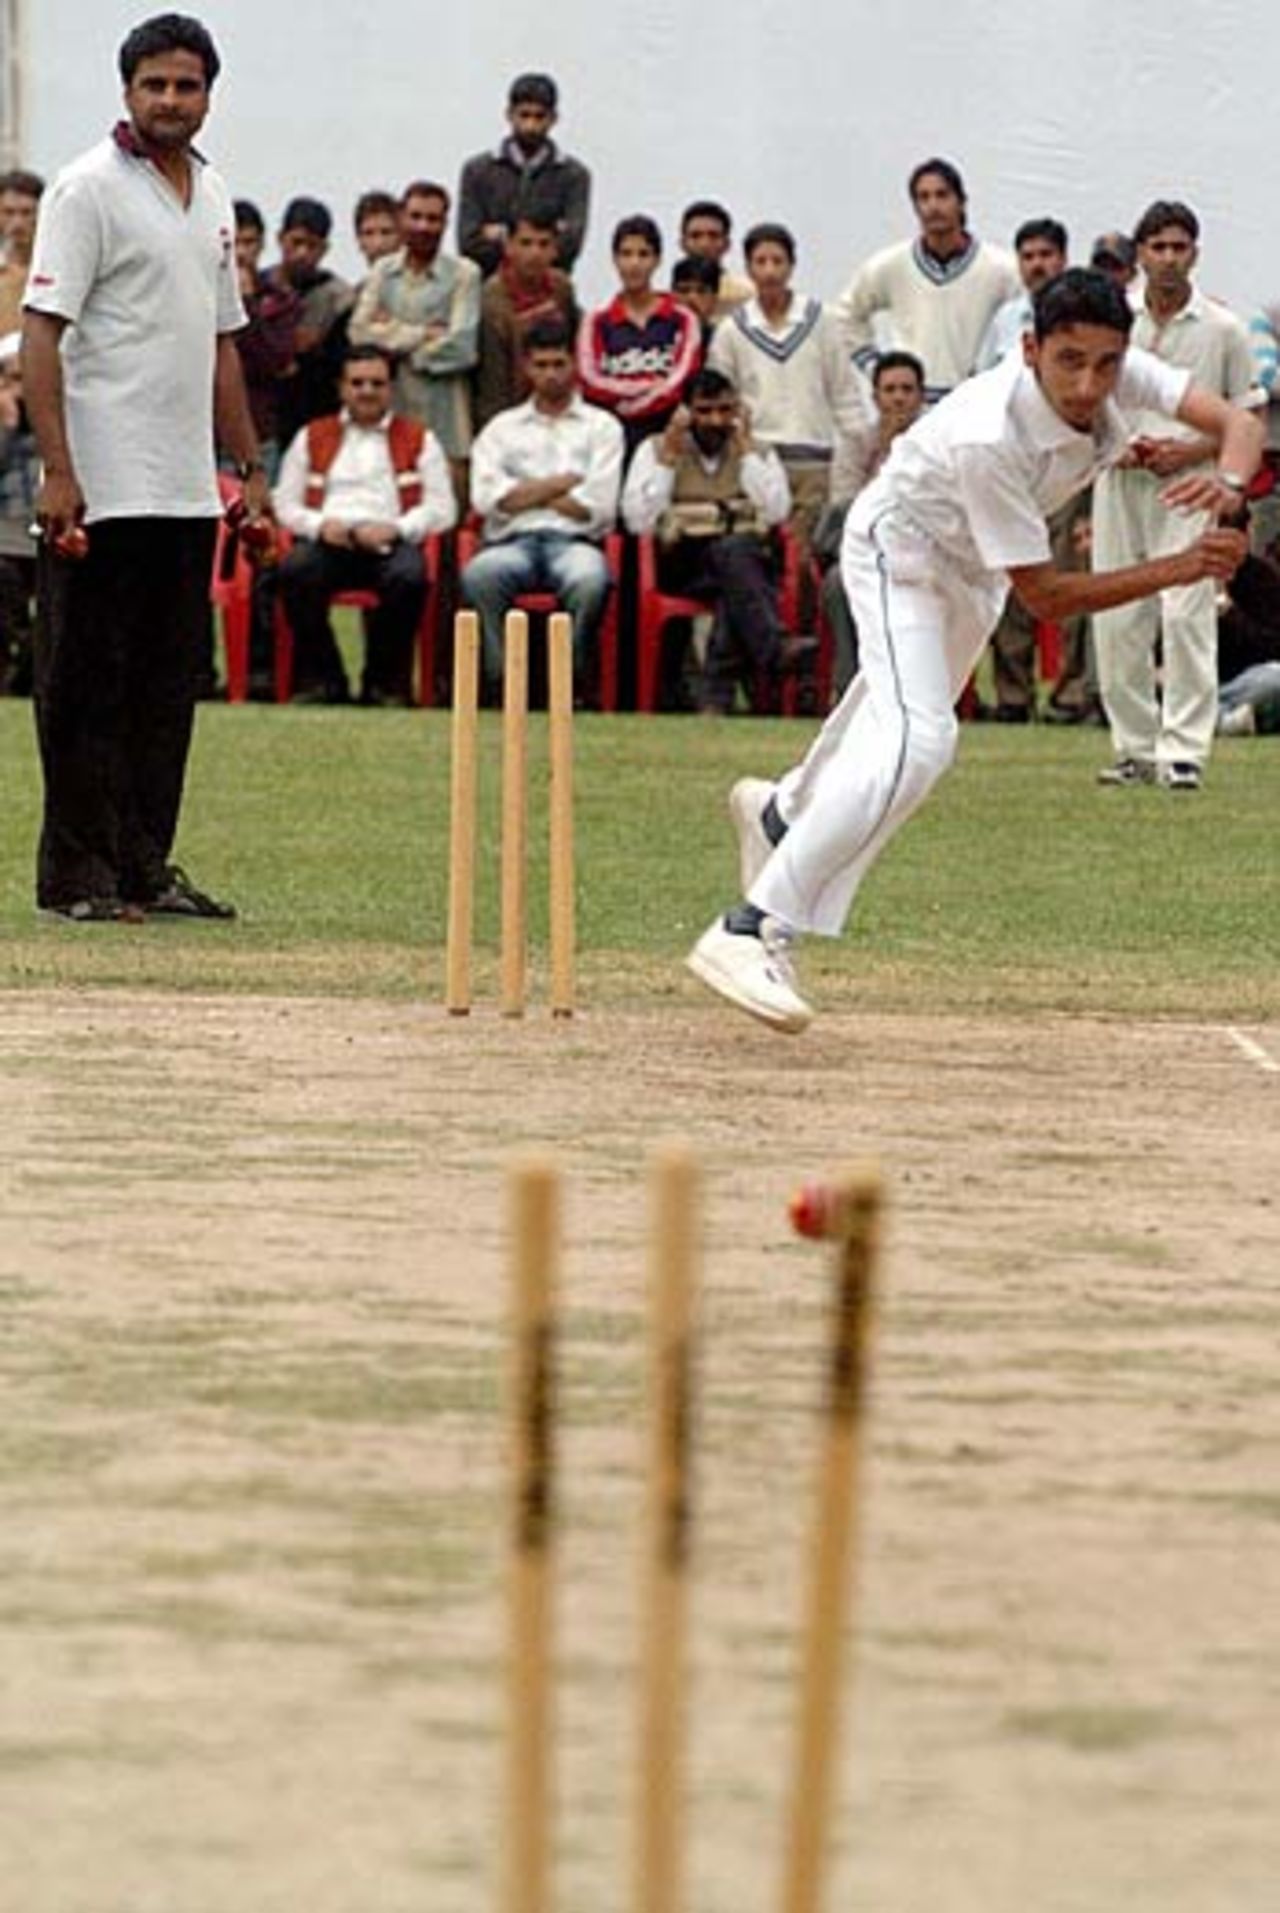 Javagal Srinath watches a Kashmiri boy bowl prior to selection for the MRF Pace Foundation, Srinagar,  May 2, 2006